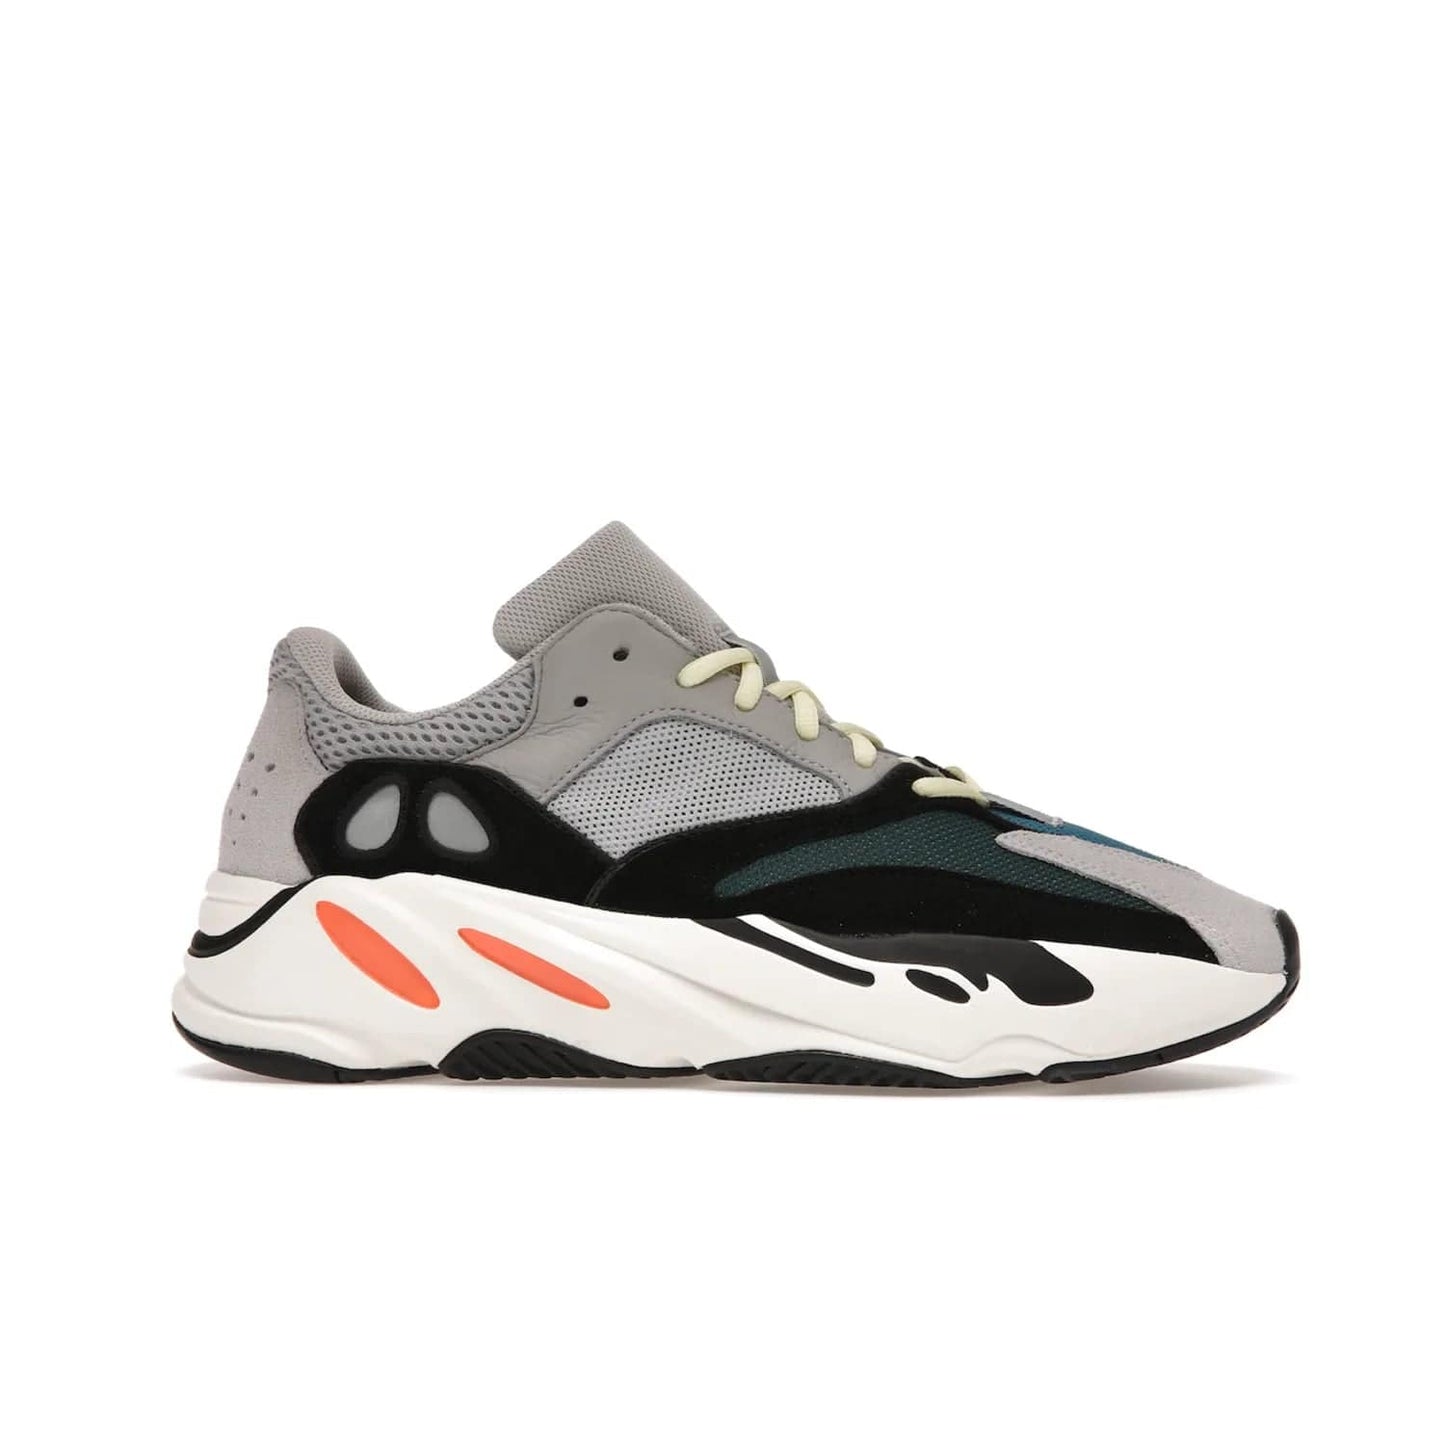 adidas Yeezy Boost 700 Wave Runner - Image 2 - Only at www.BallersClubKickz.com - Shop the iconic adidas Yeezy Boost 700 Wave Runner. Featuring grey mesh and leather upper, black suede overlays, teal mesh underlays, and signature Boost sole. Be bold & make a statement.